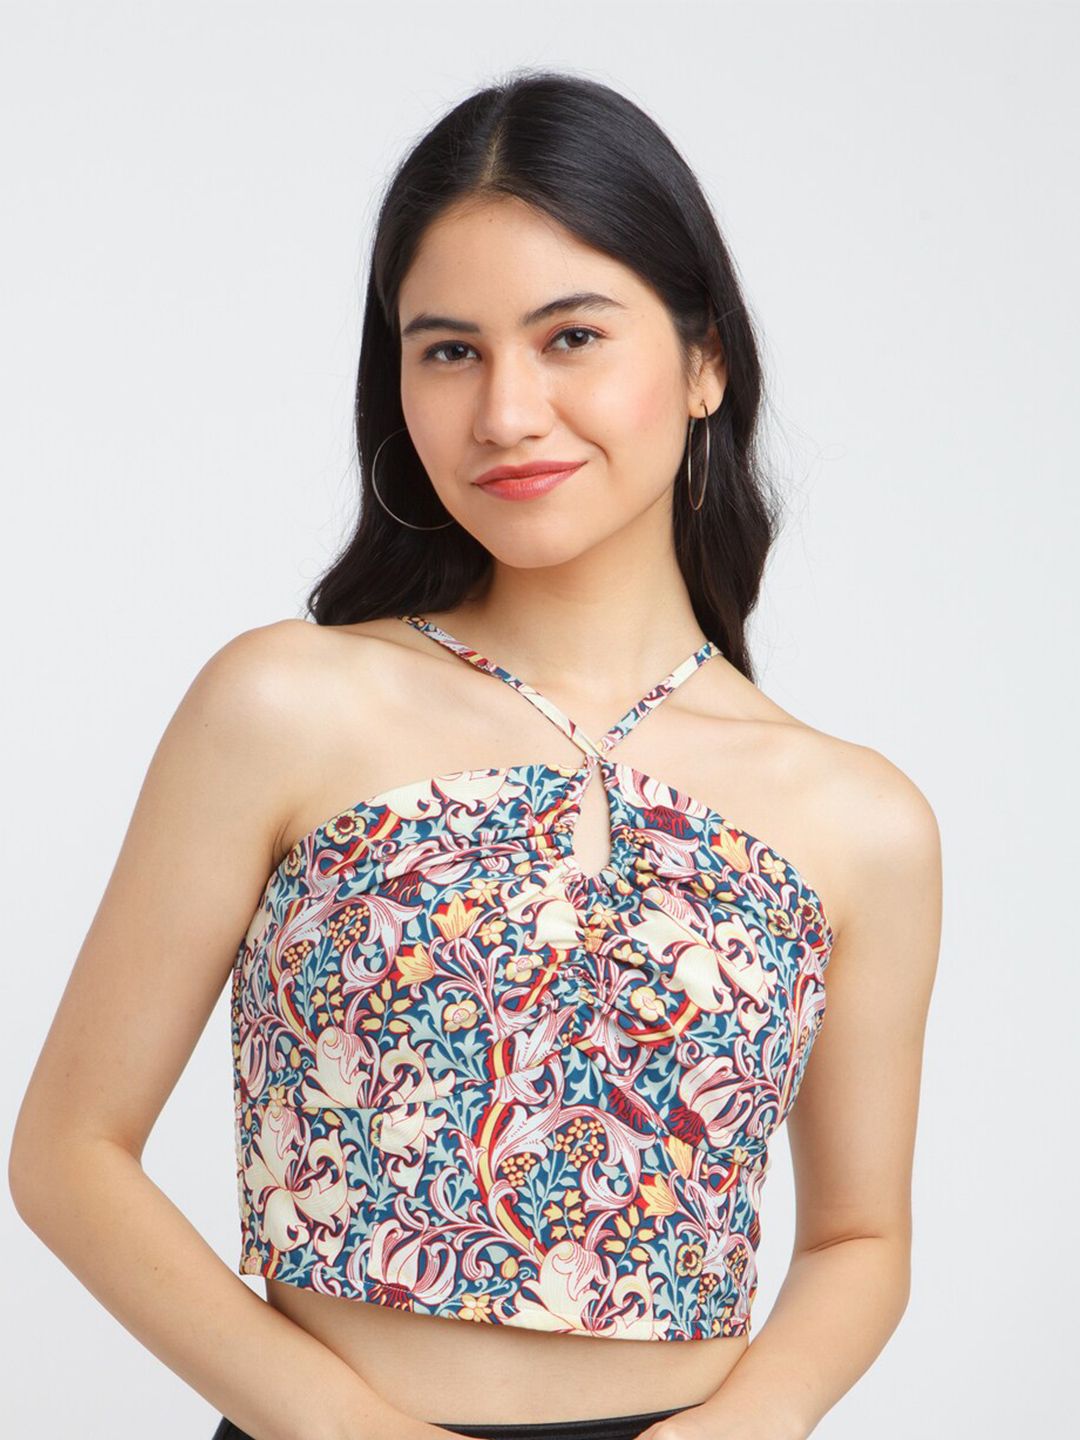 Zink London Women's  Multi-Colored Floral Print Crop Top Price in India